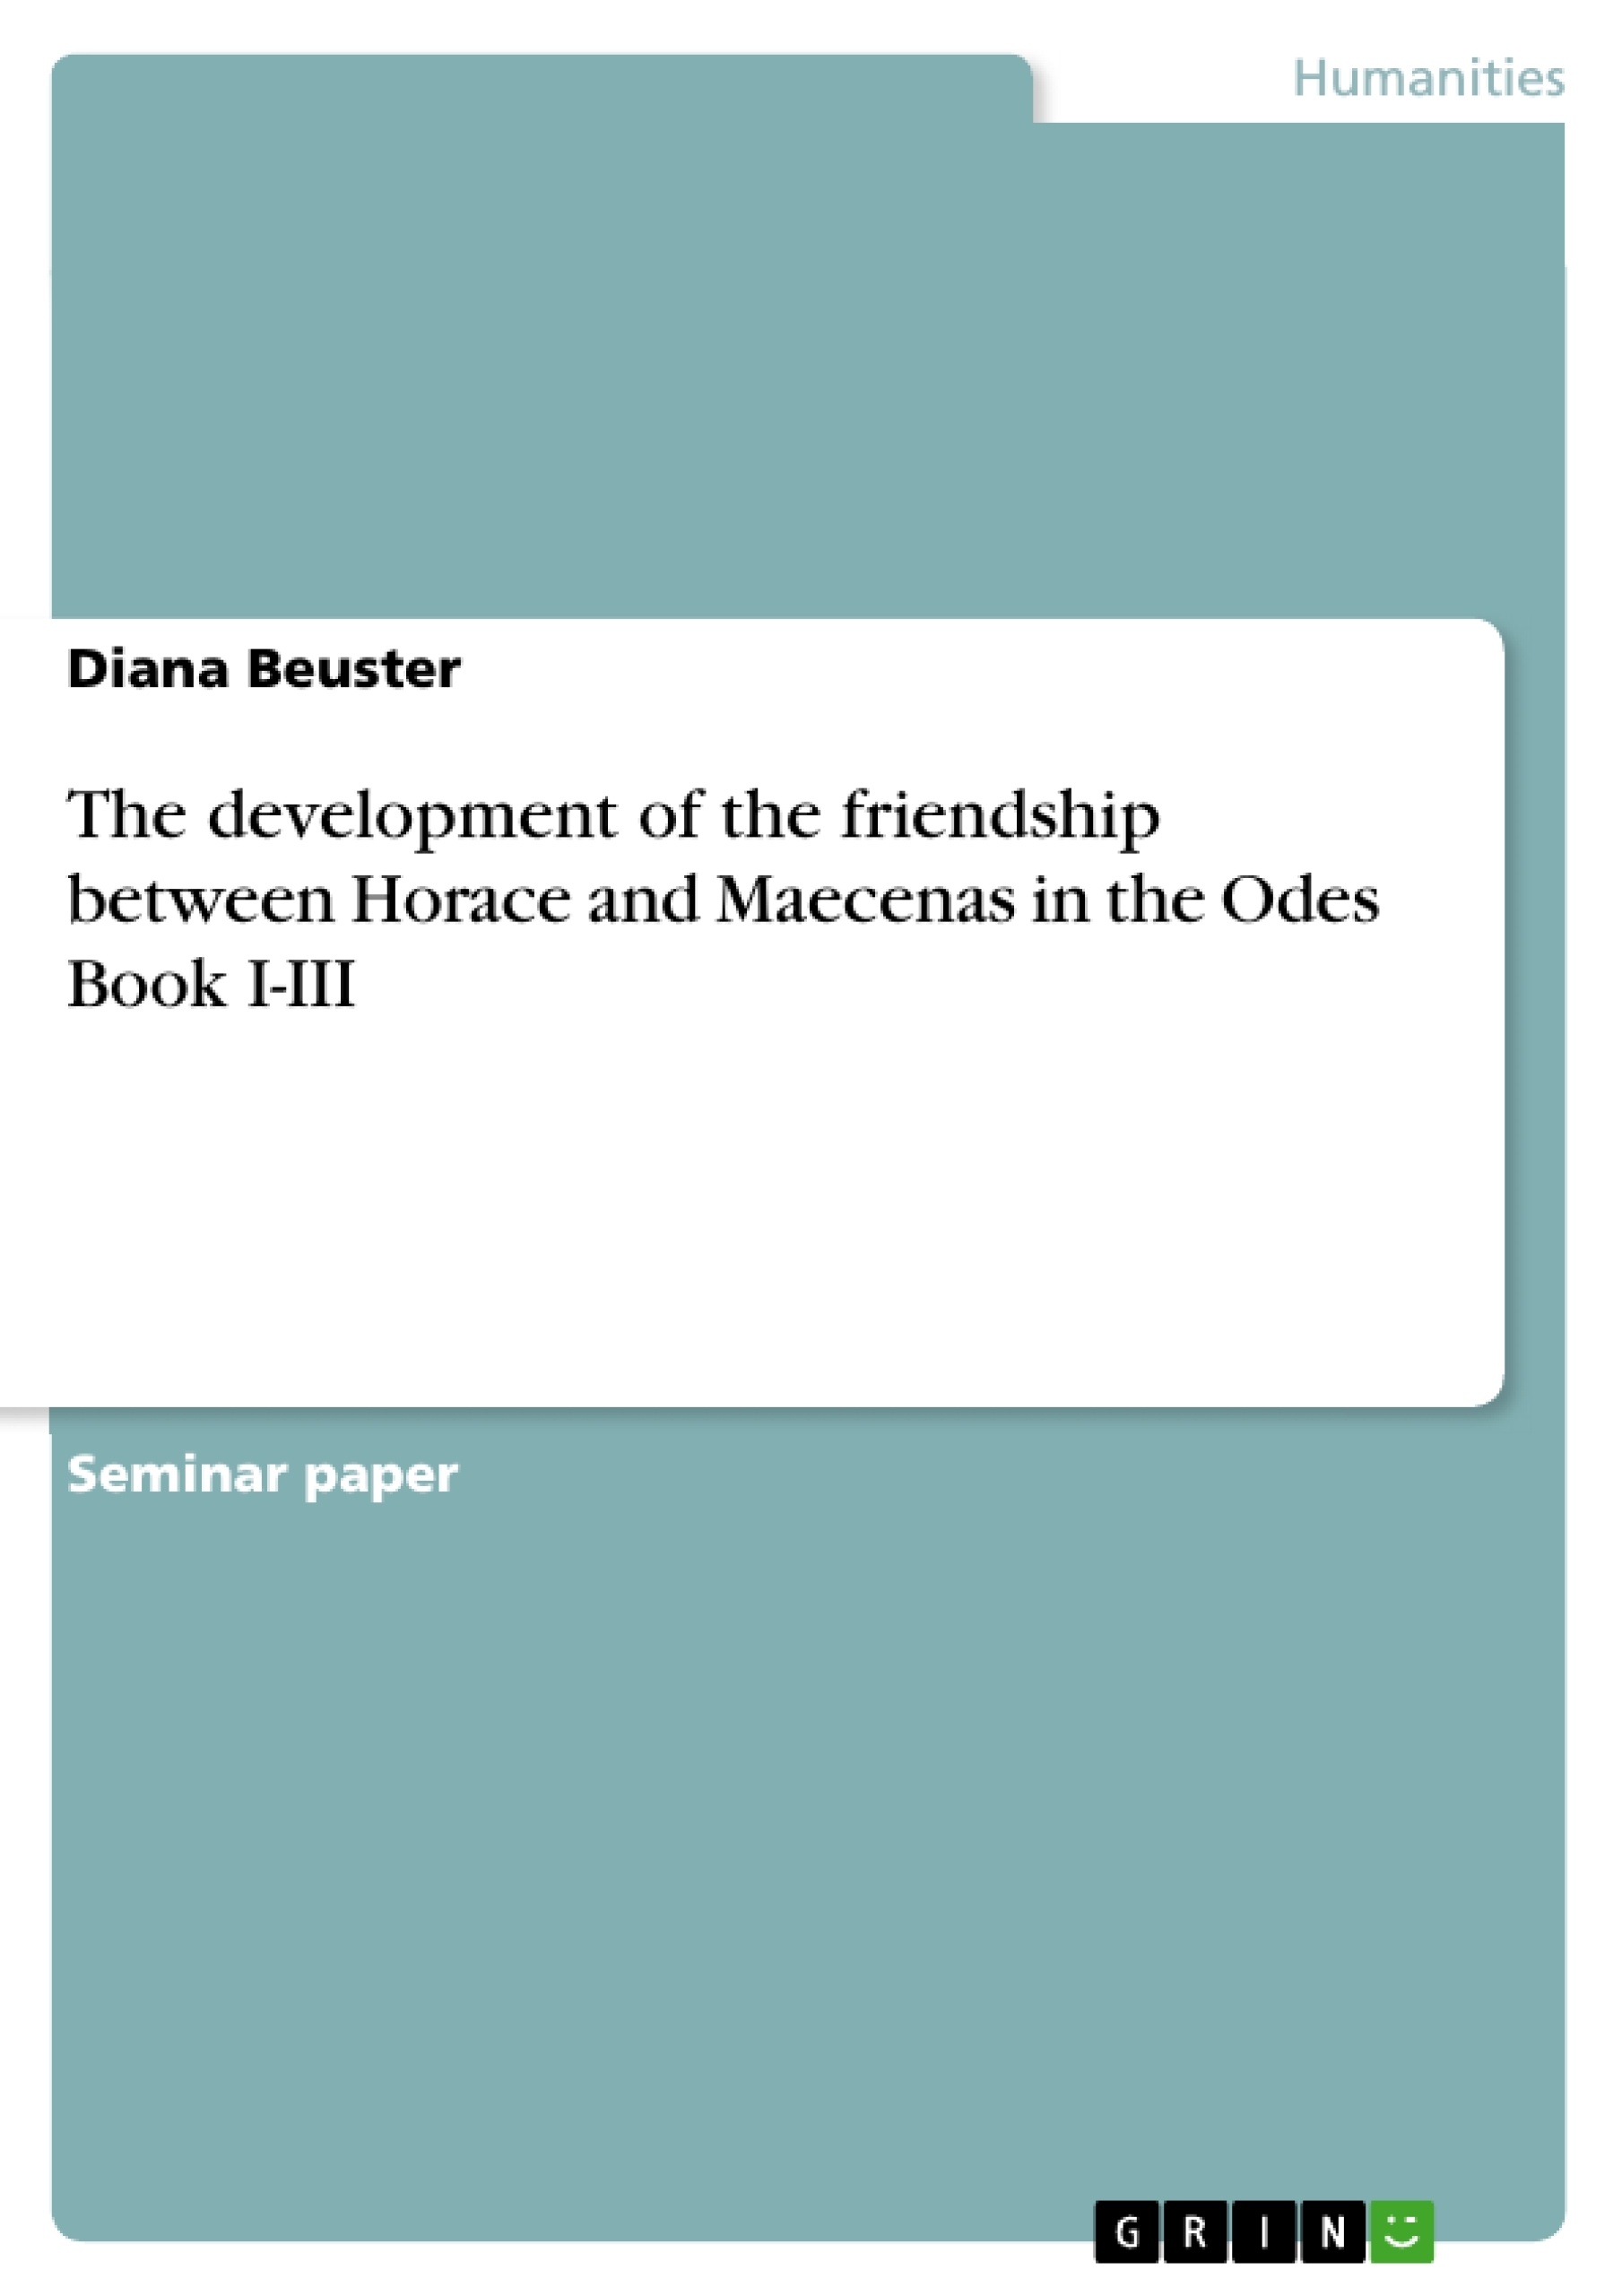 Título: The development of the friendship between Horace and Maecenas in the Odes Book I-III